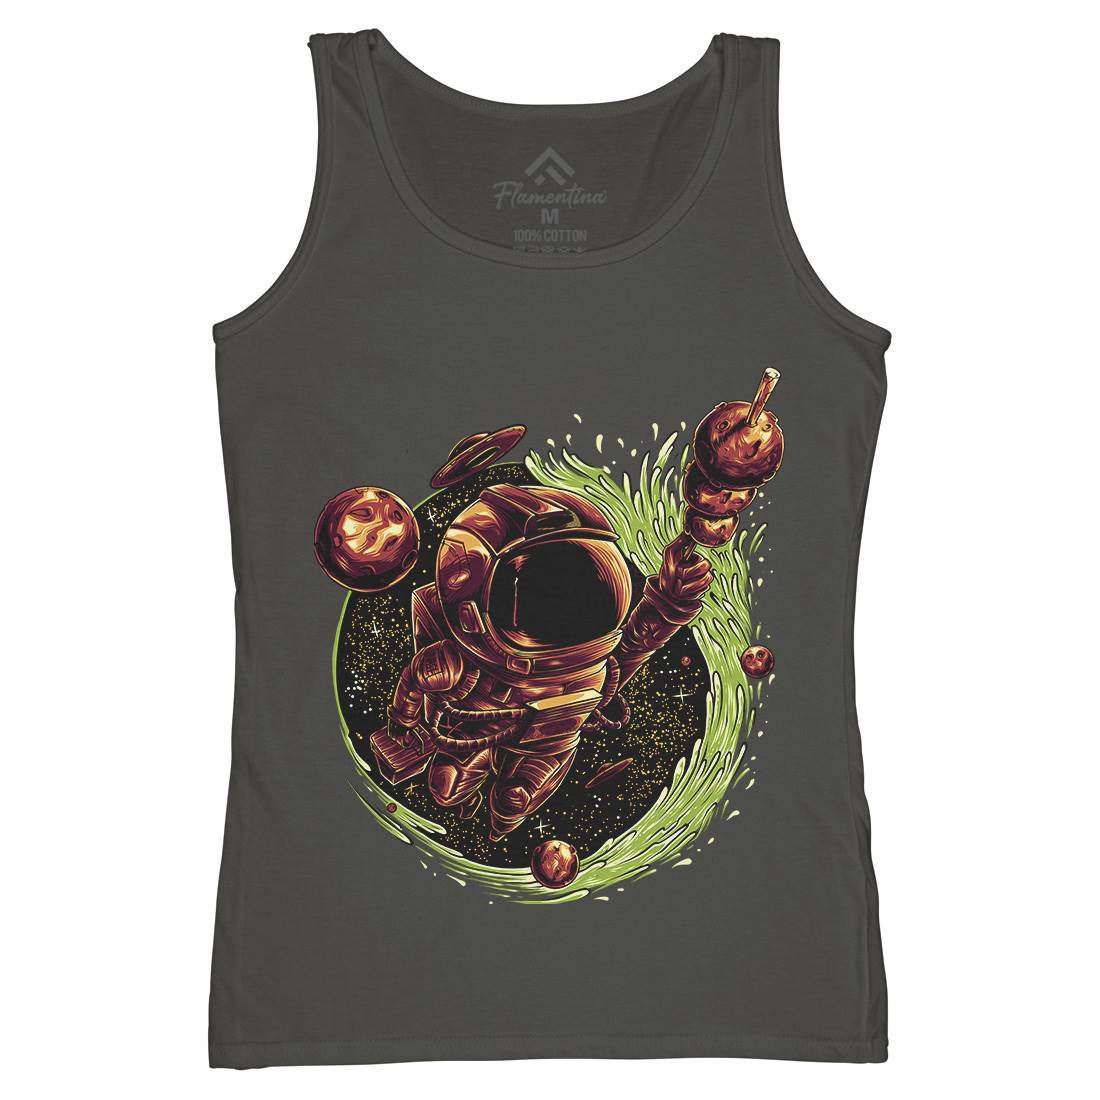 Grilled Meatball Womens Organic Tank Top Vest Space D037